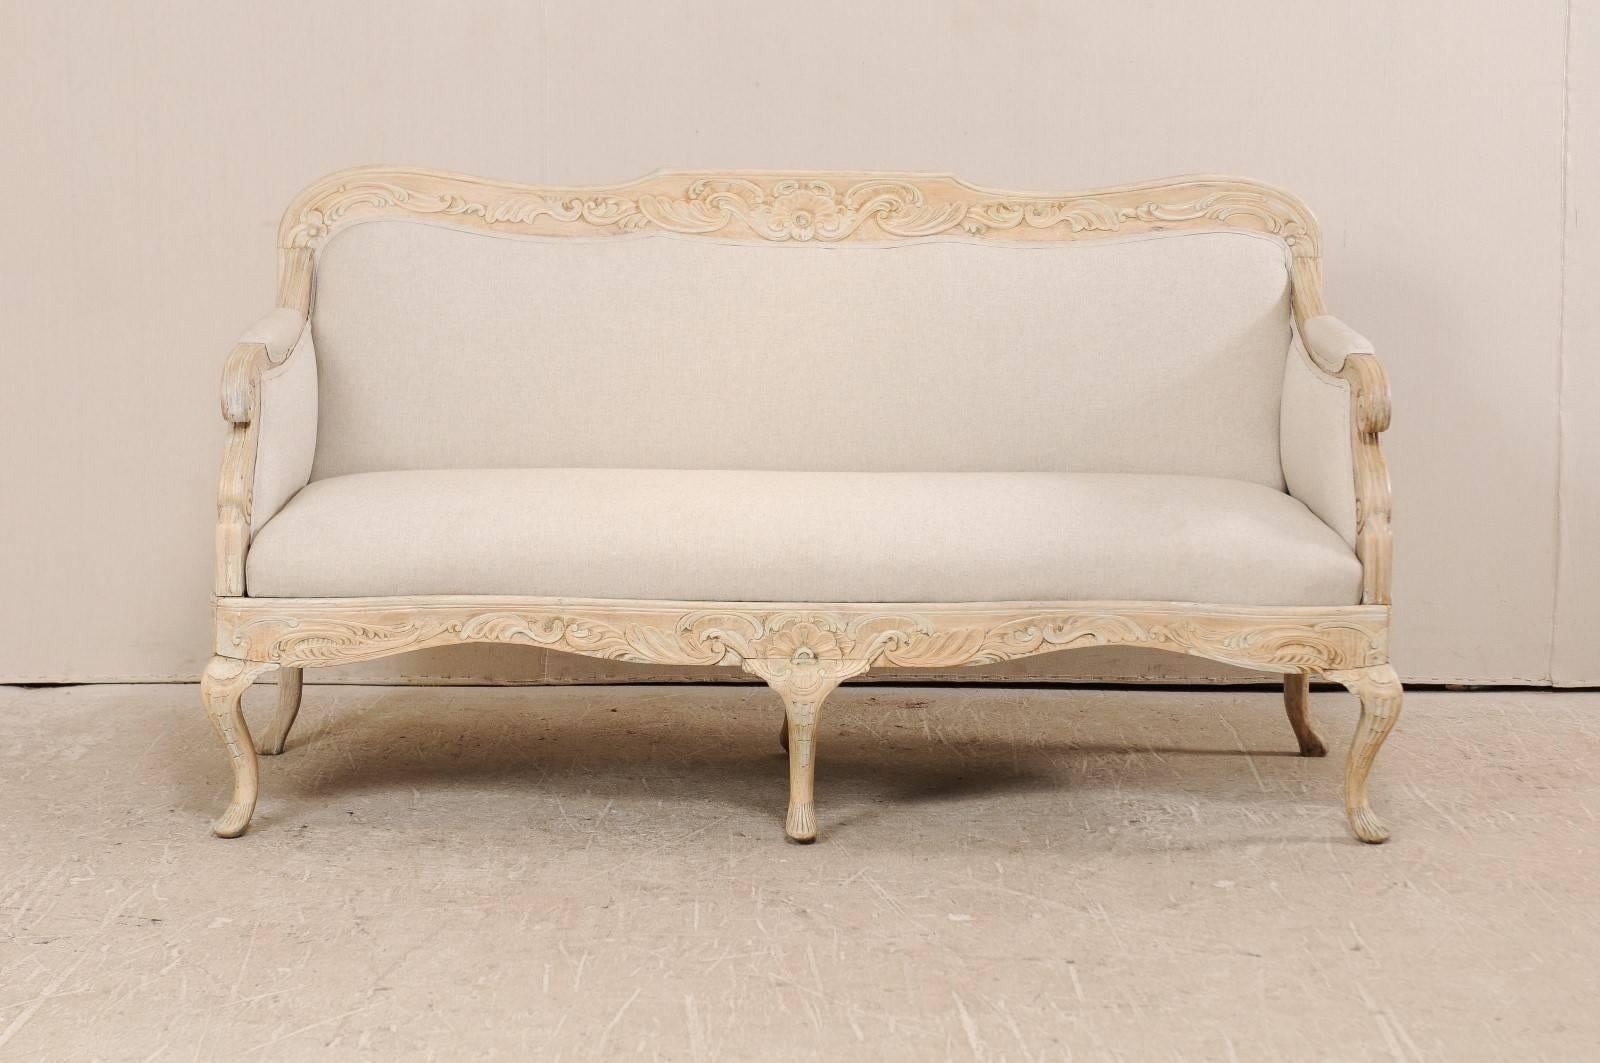 A Danish period Rococo sofa from the 18th century. This antique Danish sofa features a beautifully carved wood frame in a floral and leaf motif, carved scrolling knuckles, a gently valanced skirt, and cabriole legs. This sofa has been newly